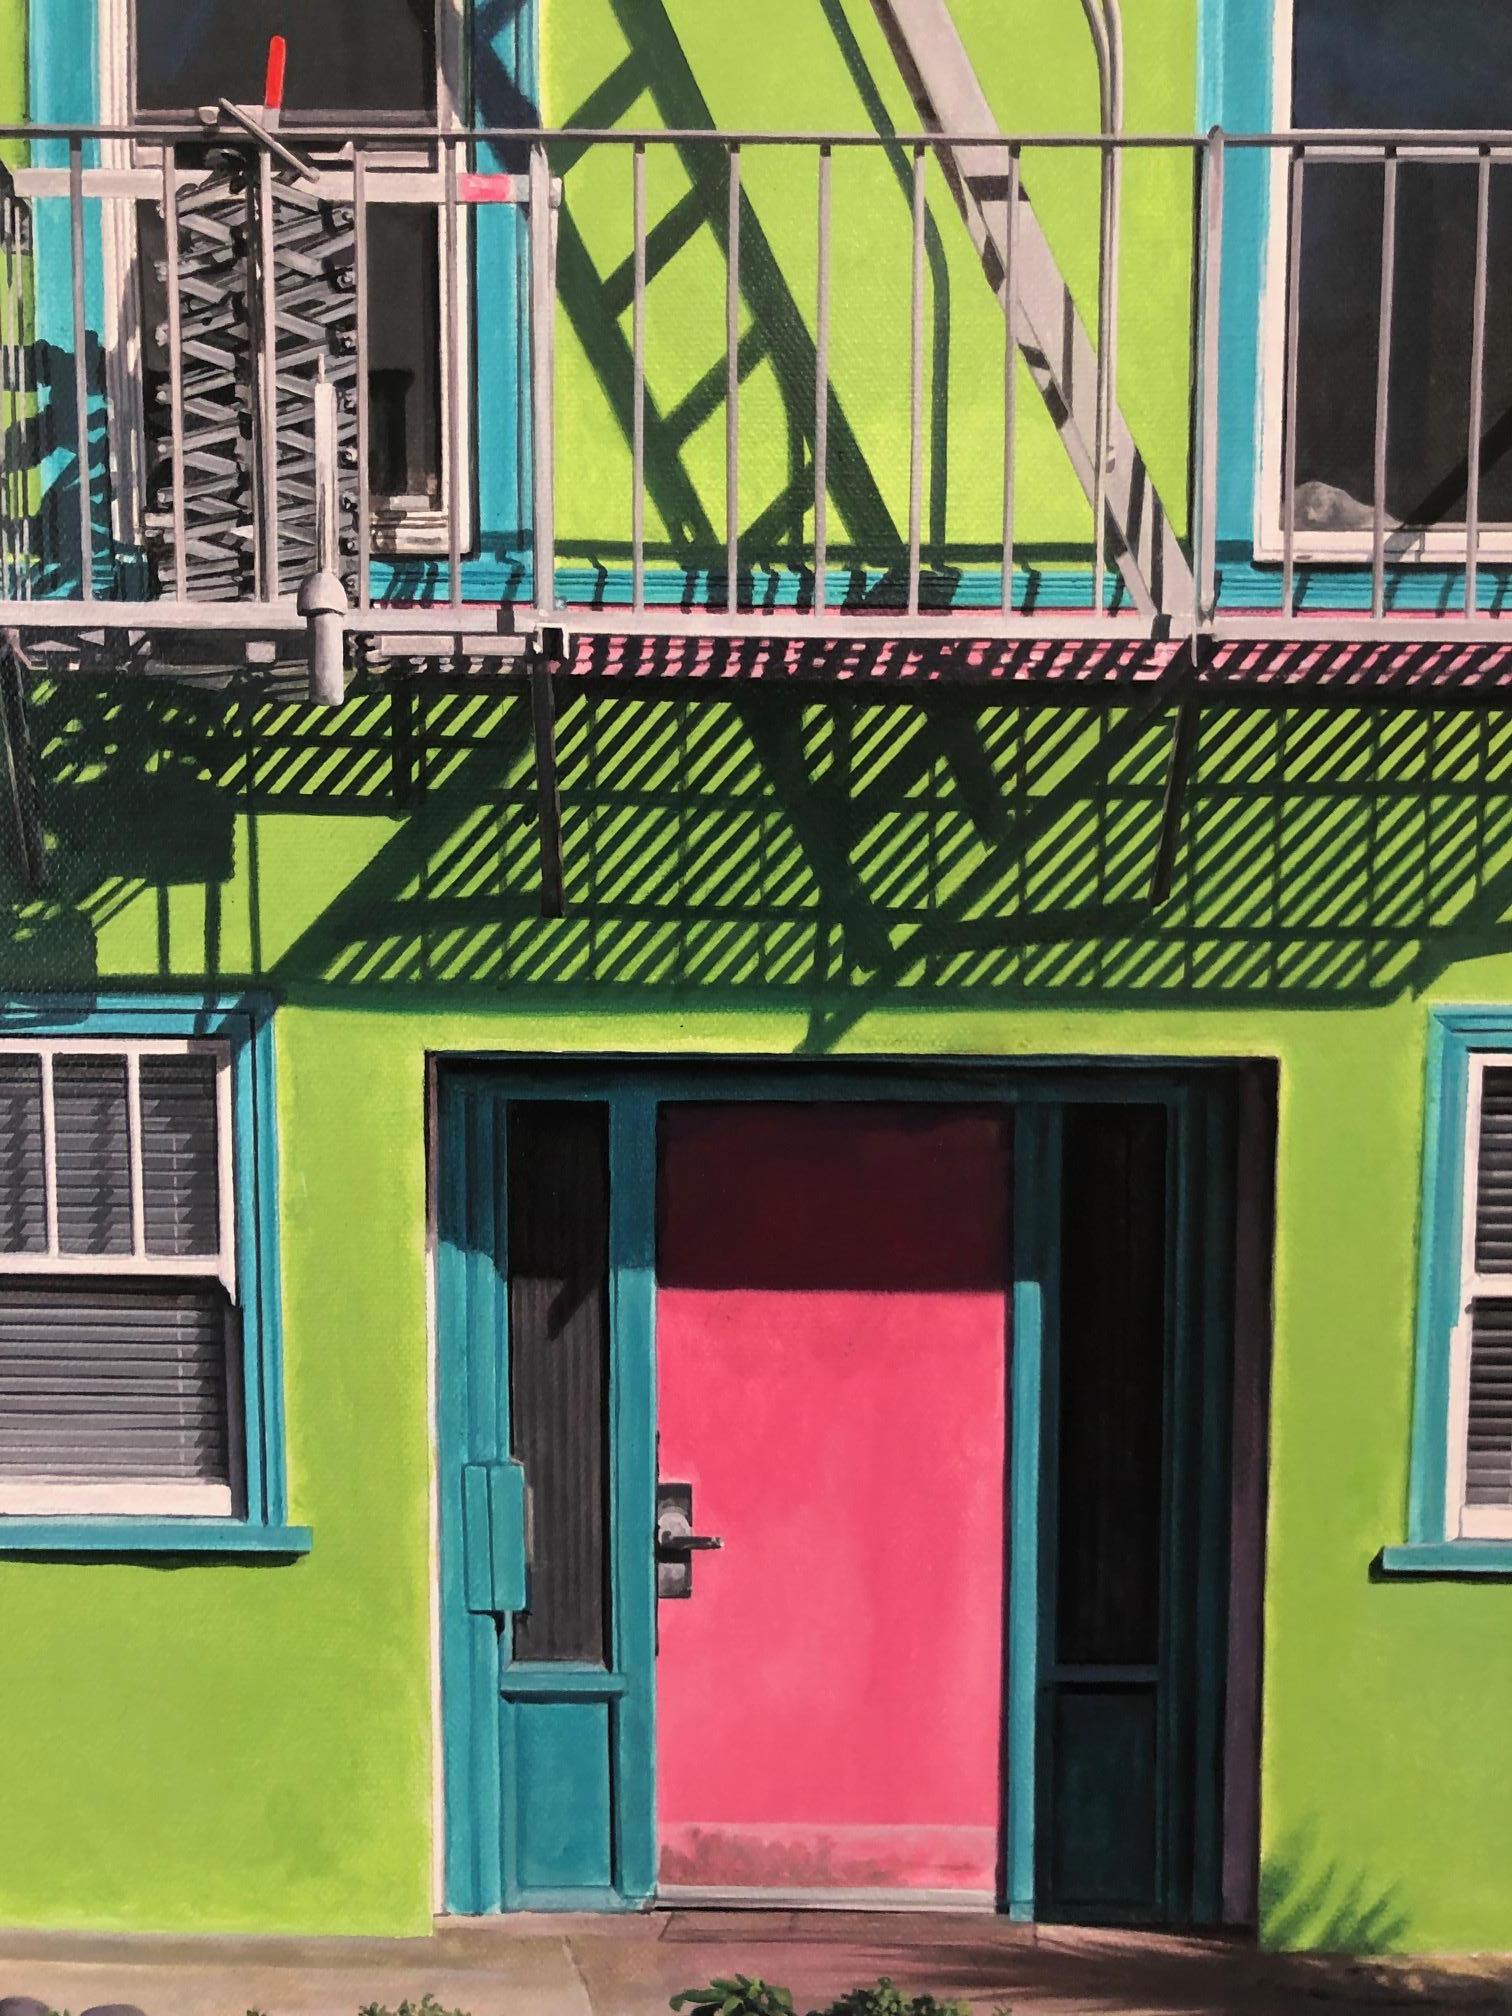 'Wild Child' depicts a San Francisco home, painted brightly to reflect the free spirited city that is bathed in warm west coast sunlight with shadows cascading across the facade of the building, which is the artist's focus in her Shadows and